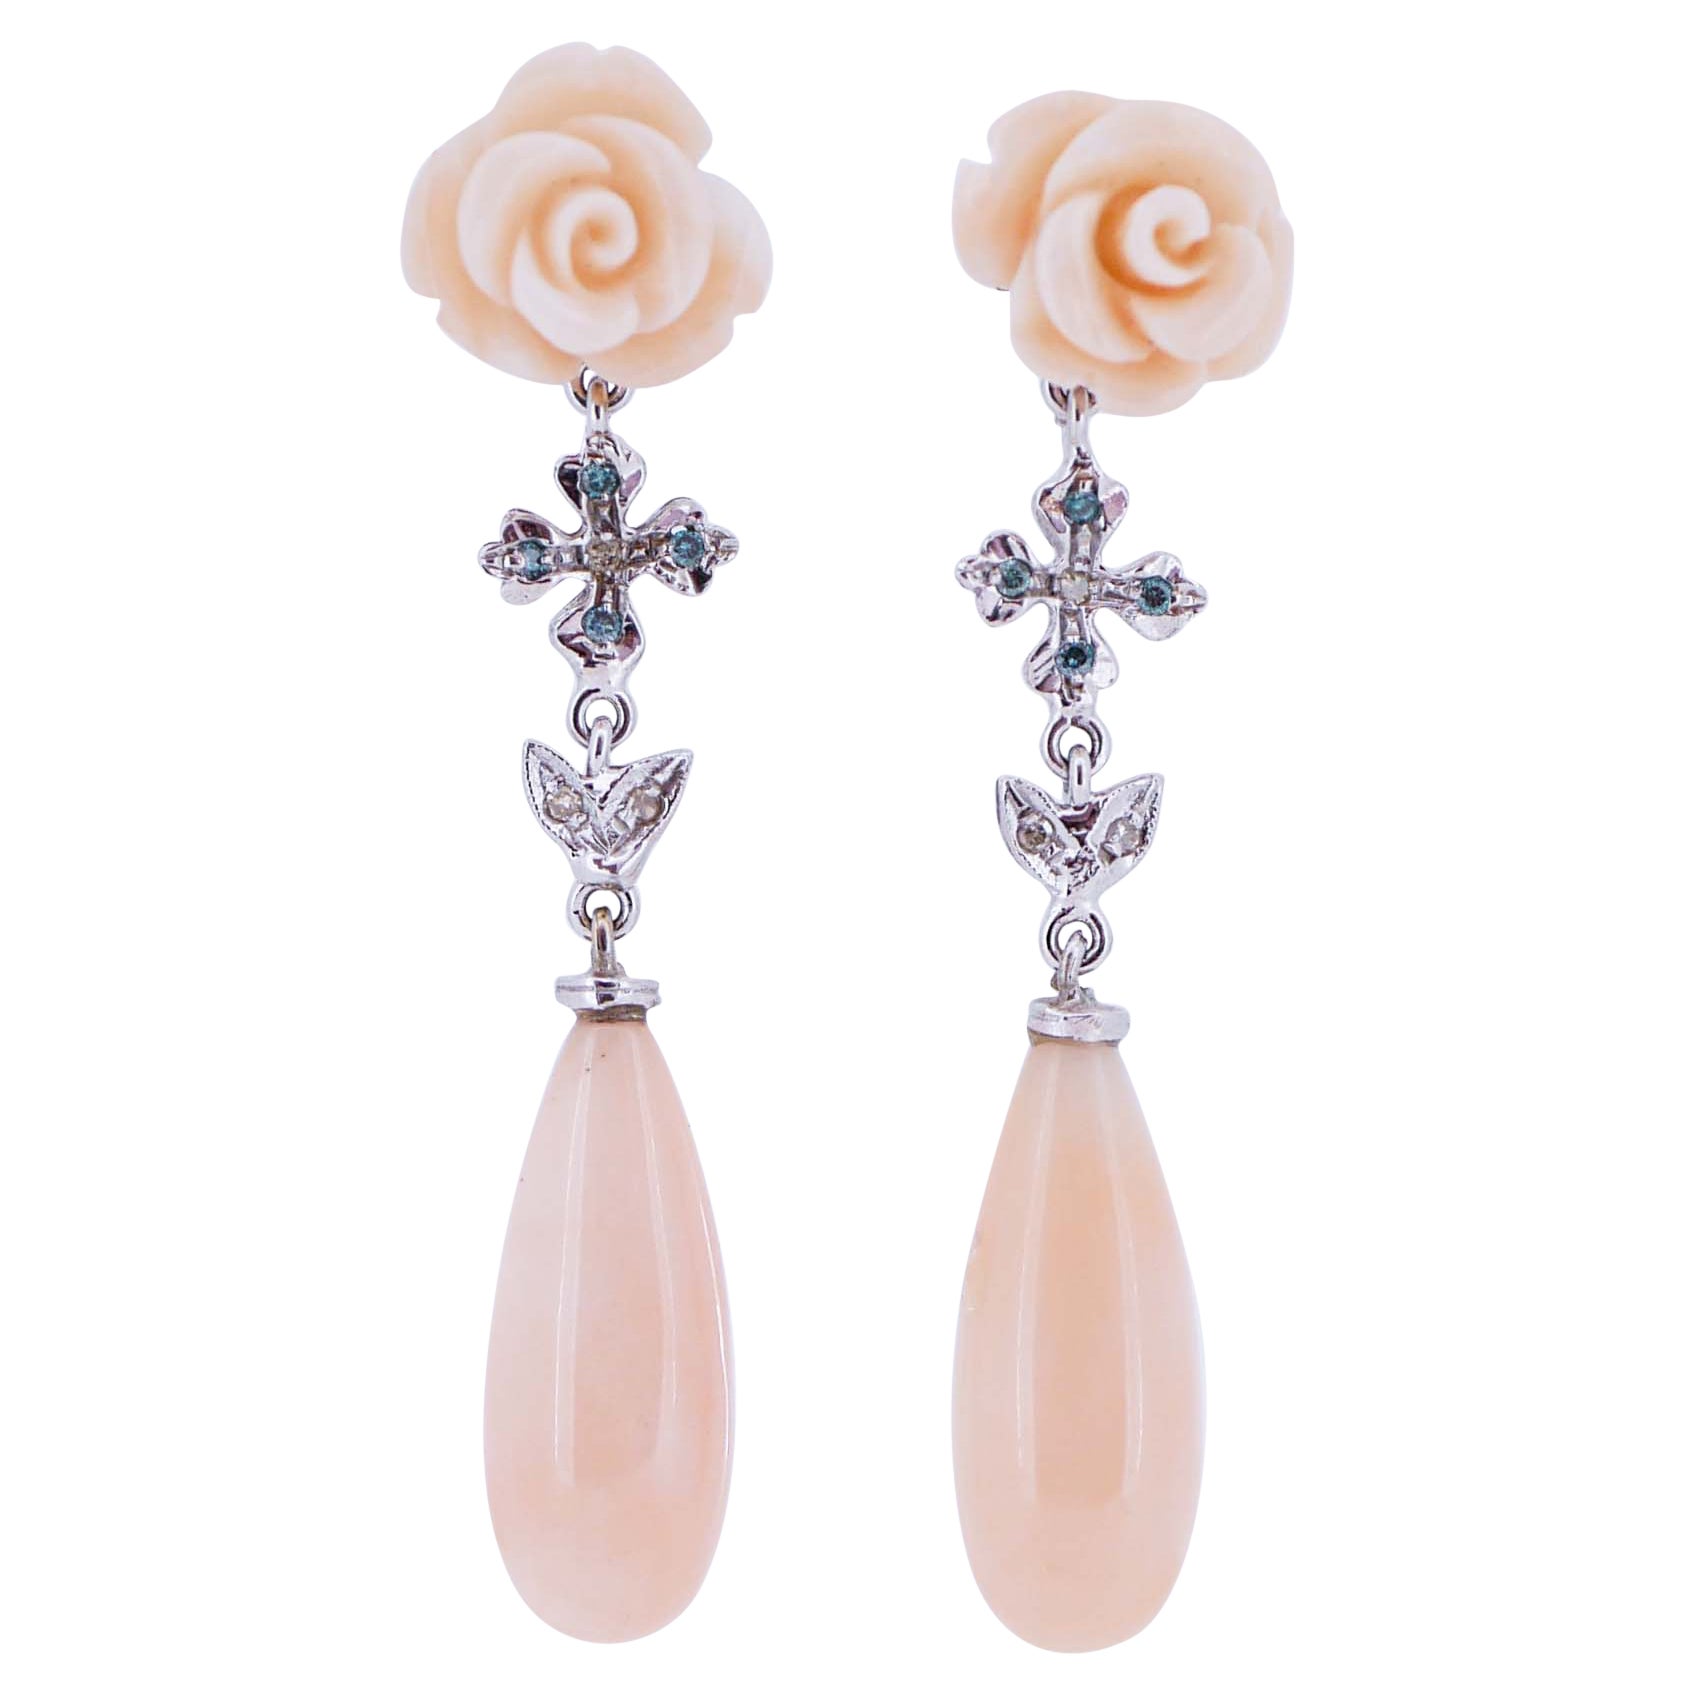 White and Blue Fancy Diamonds, Pink Coral, 14 Karat  White Gold Drop Earrings. For Sale